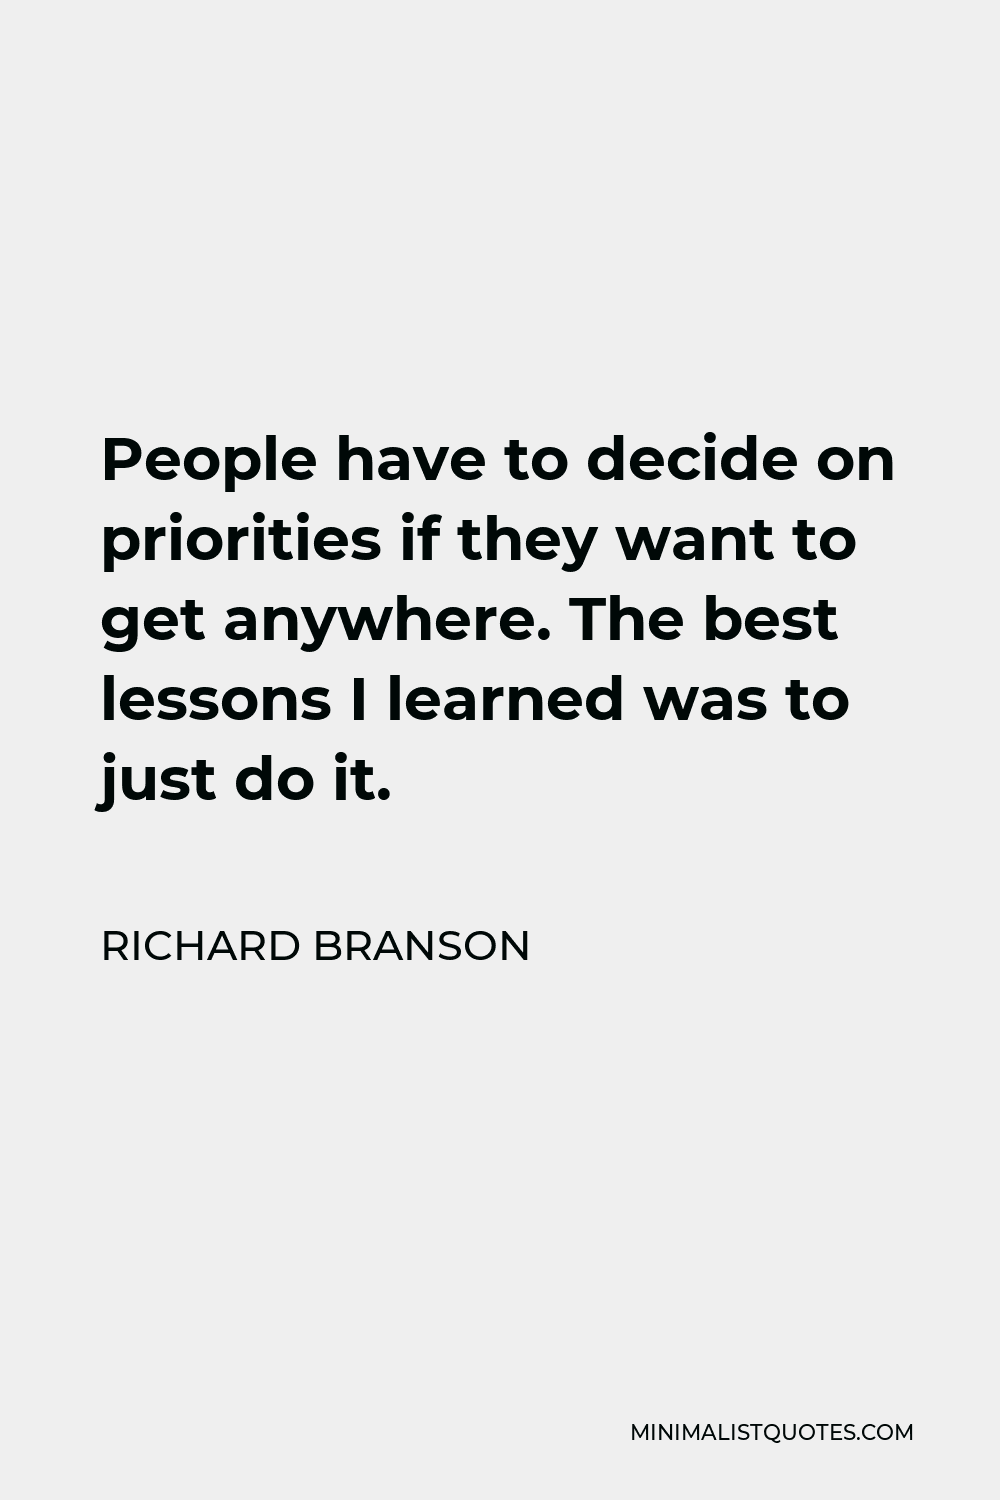 Richard Branson Quote - People have to decide on priorities if they want to get anywhere. The best lessons I learned was to just do it.